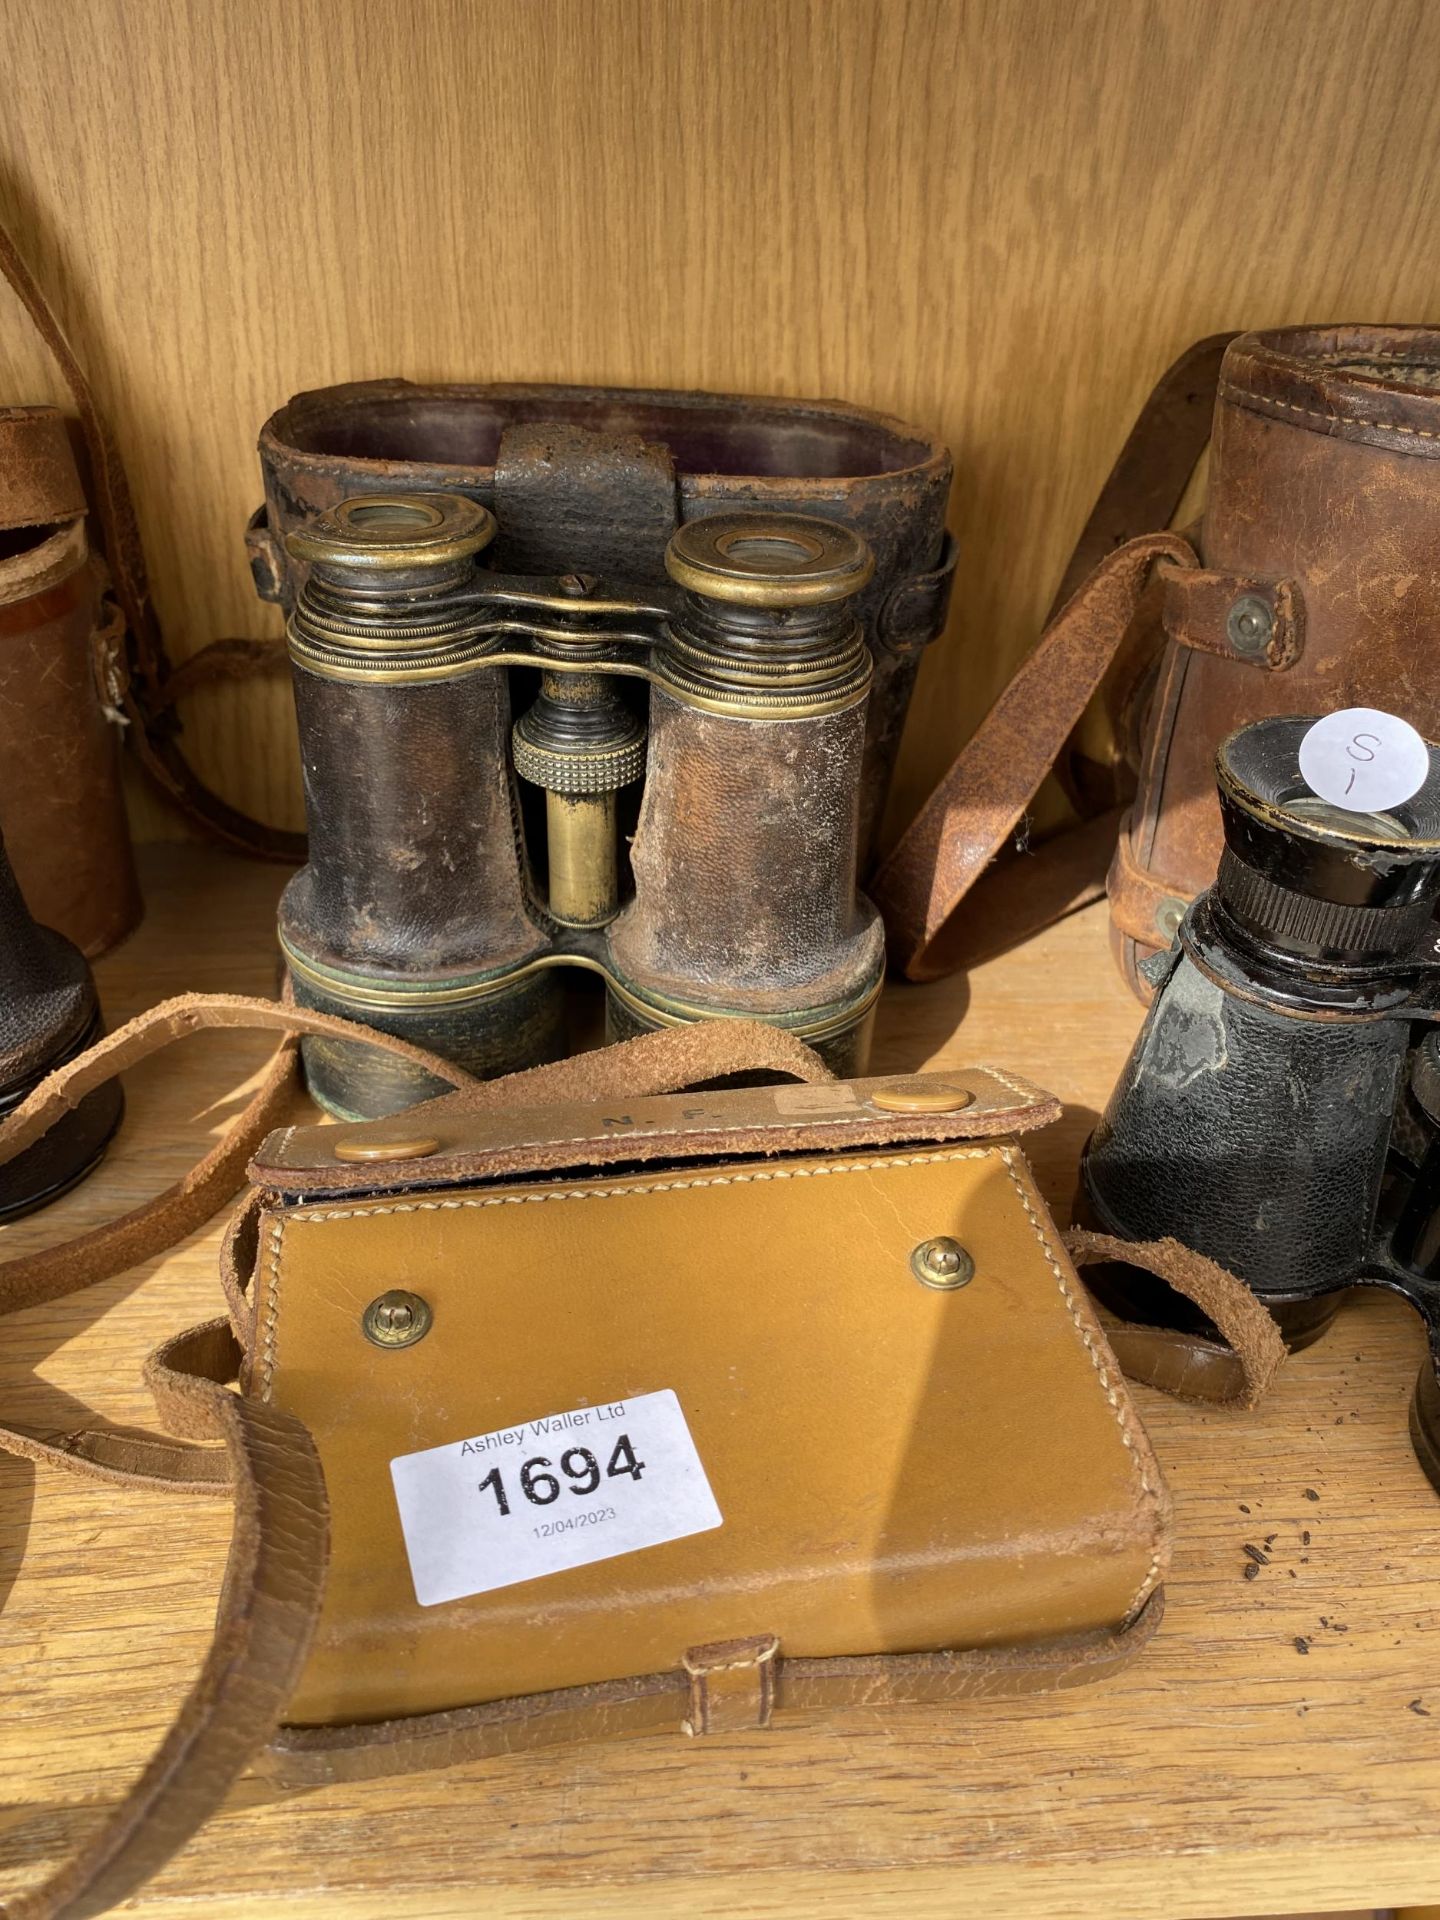 FIVE PAIRS OF VARIOUS BINOCULARS WITH CARRY CASES - Image 3 of 4